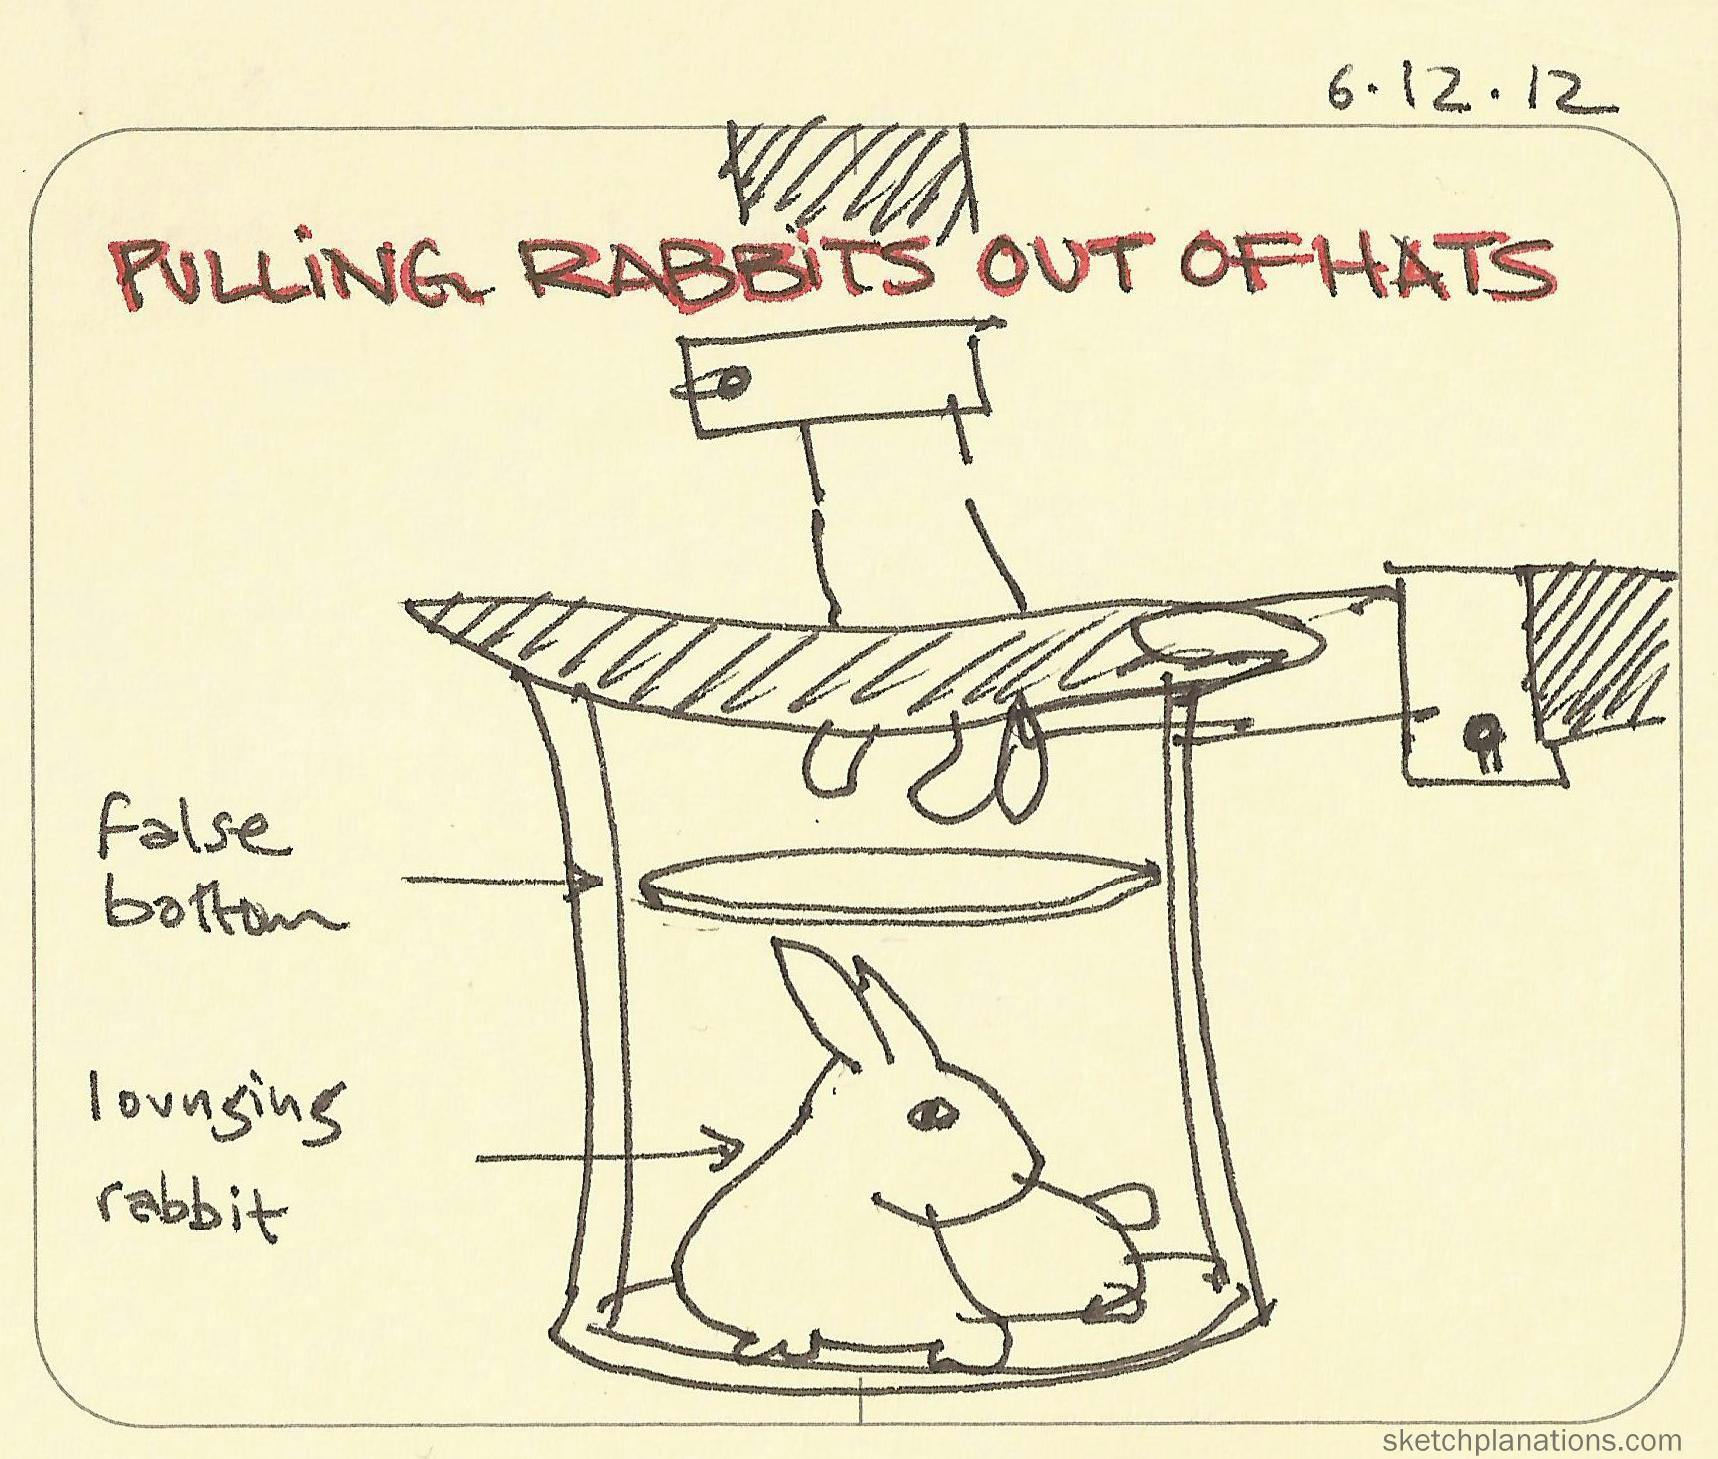 Pulling rabbits out of hats - Sketchplanations